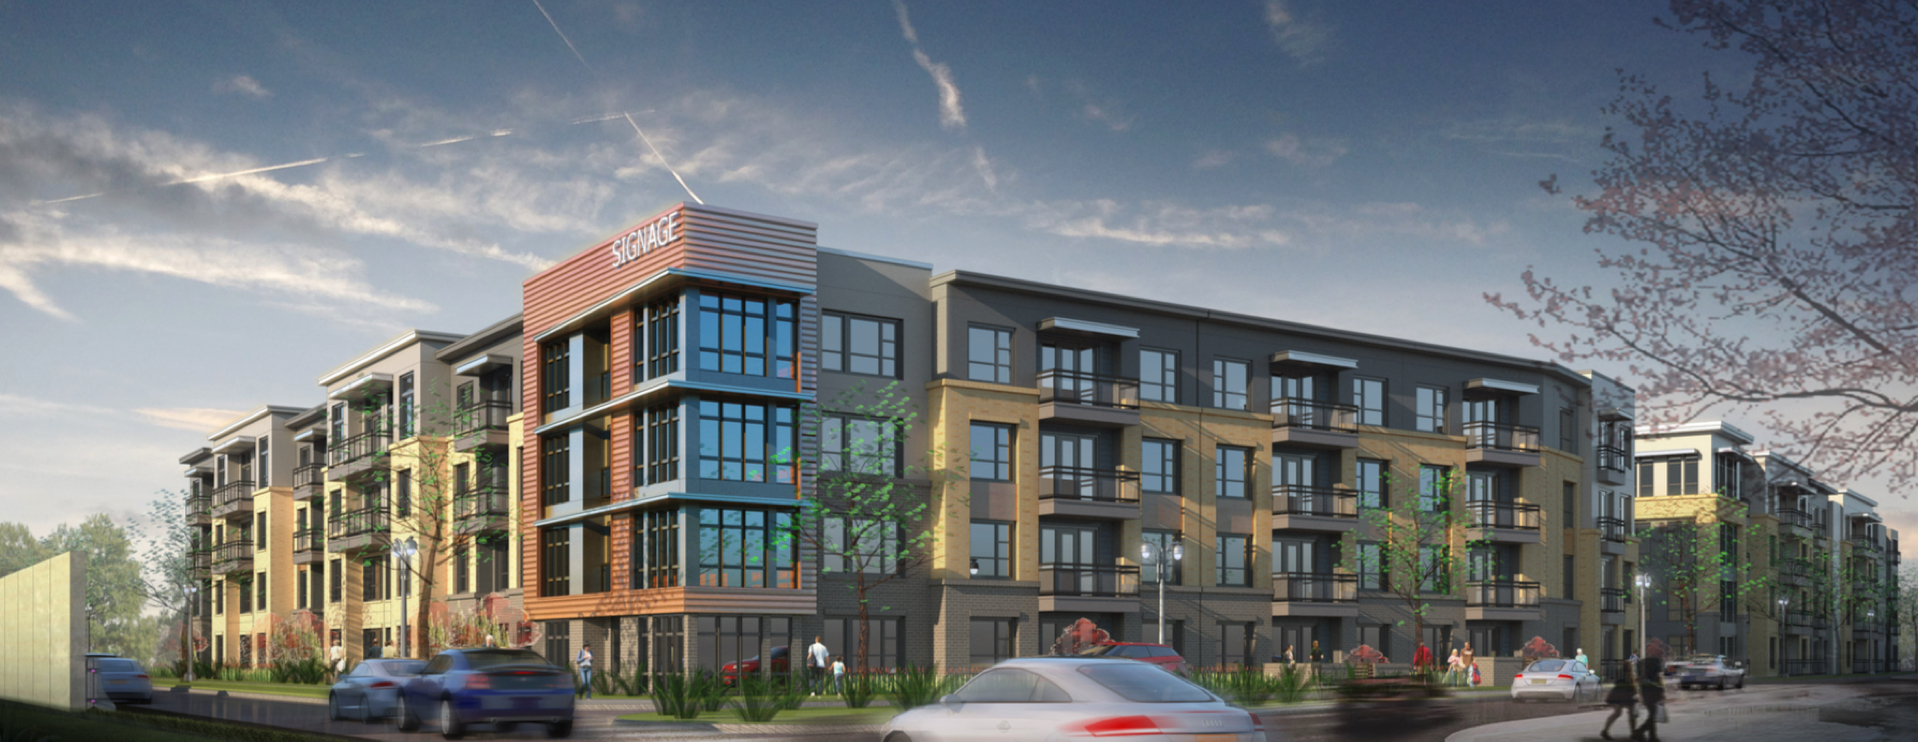 Planned Allen City Center Project Would Include Apartments Office And Future Retail